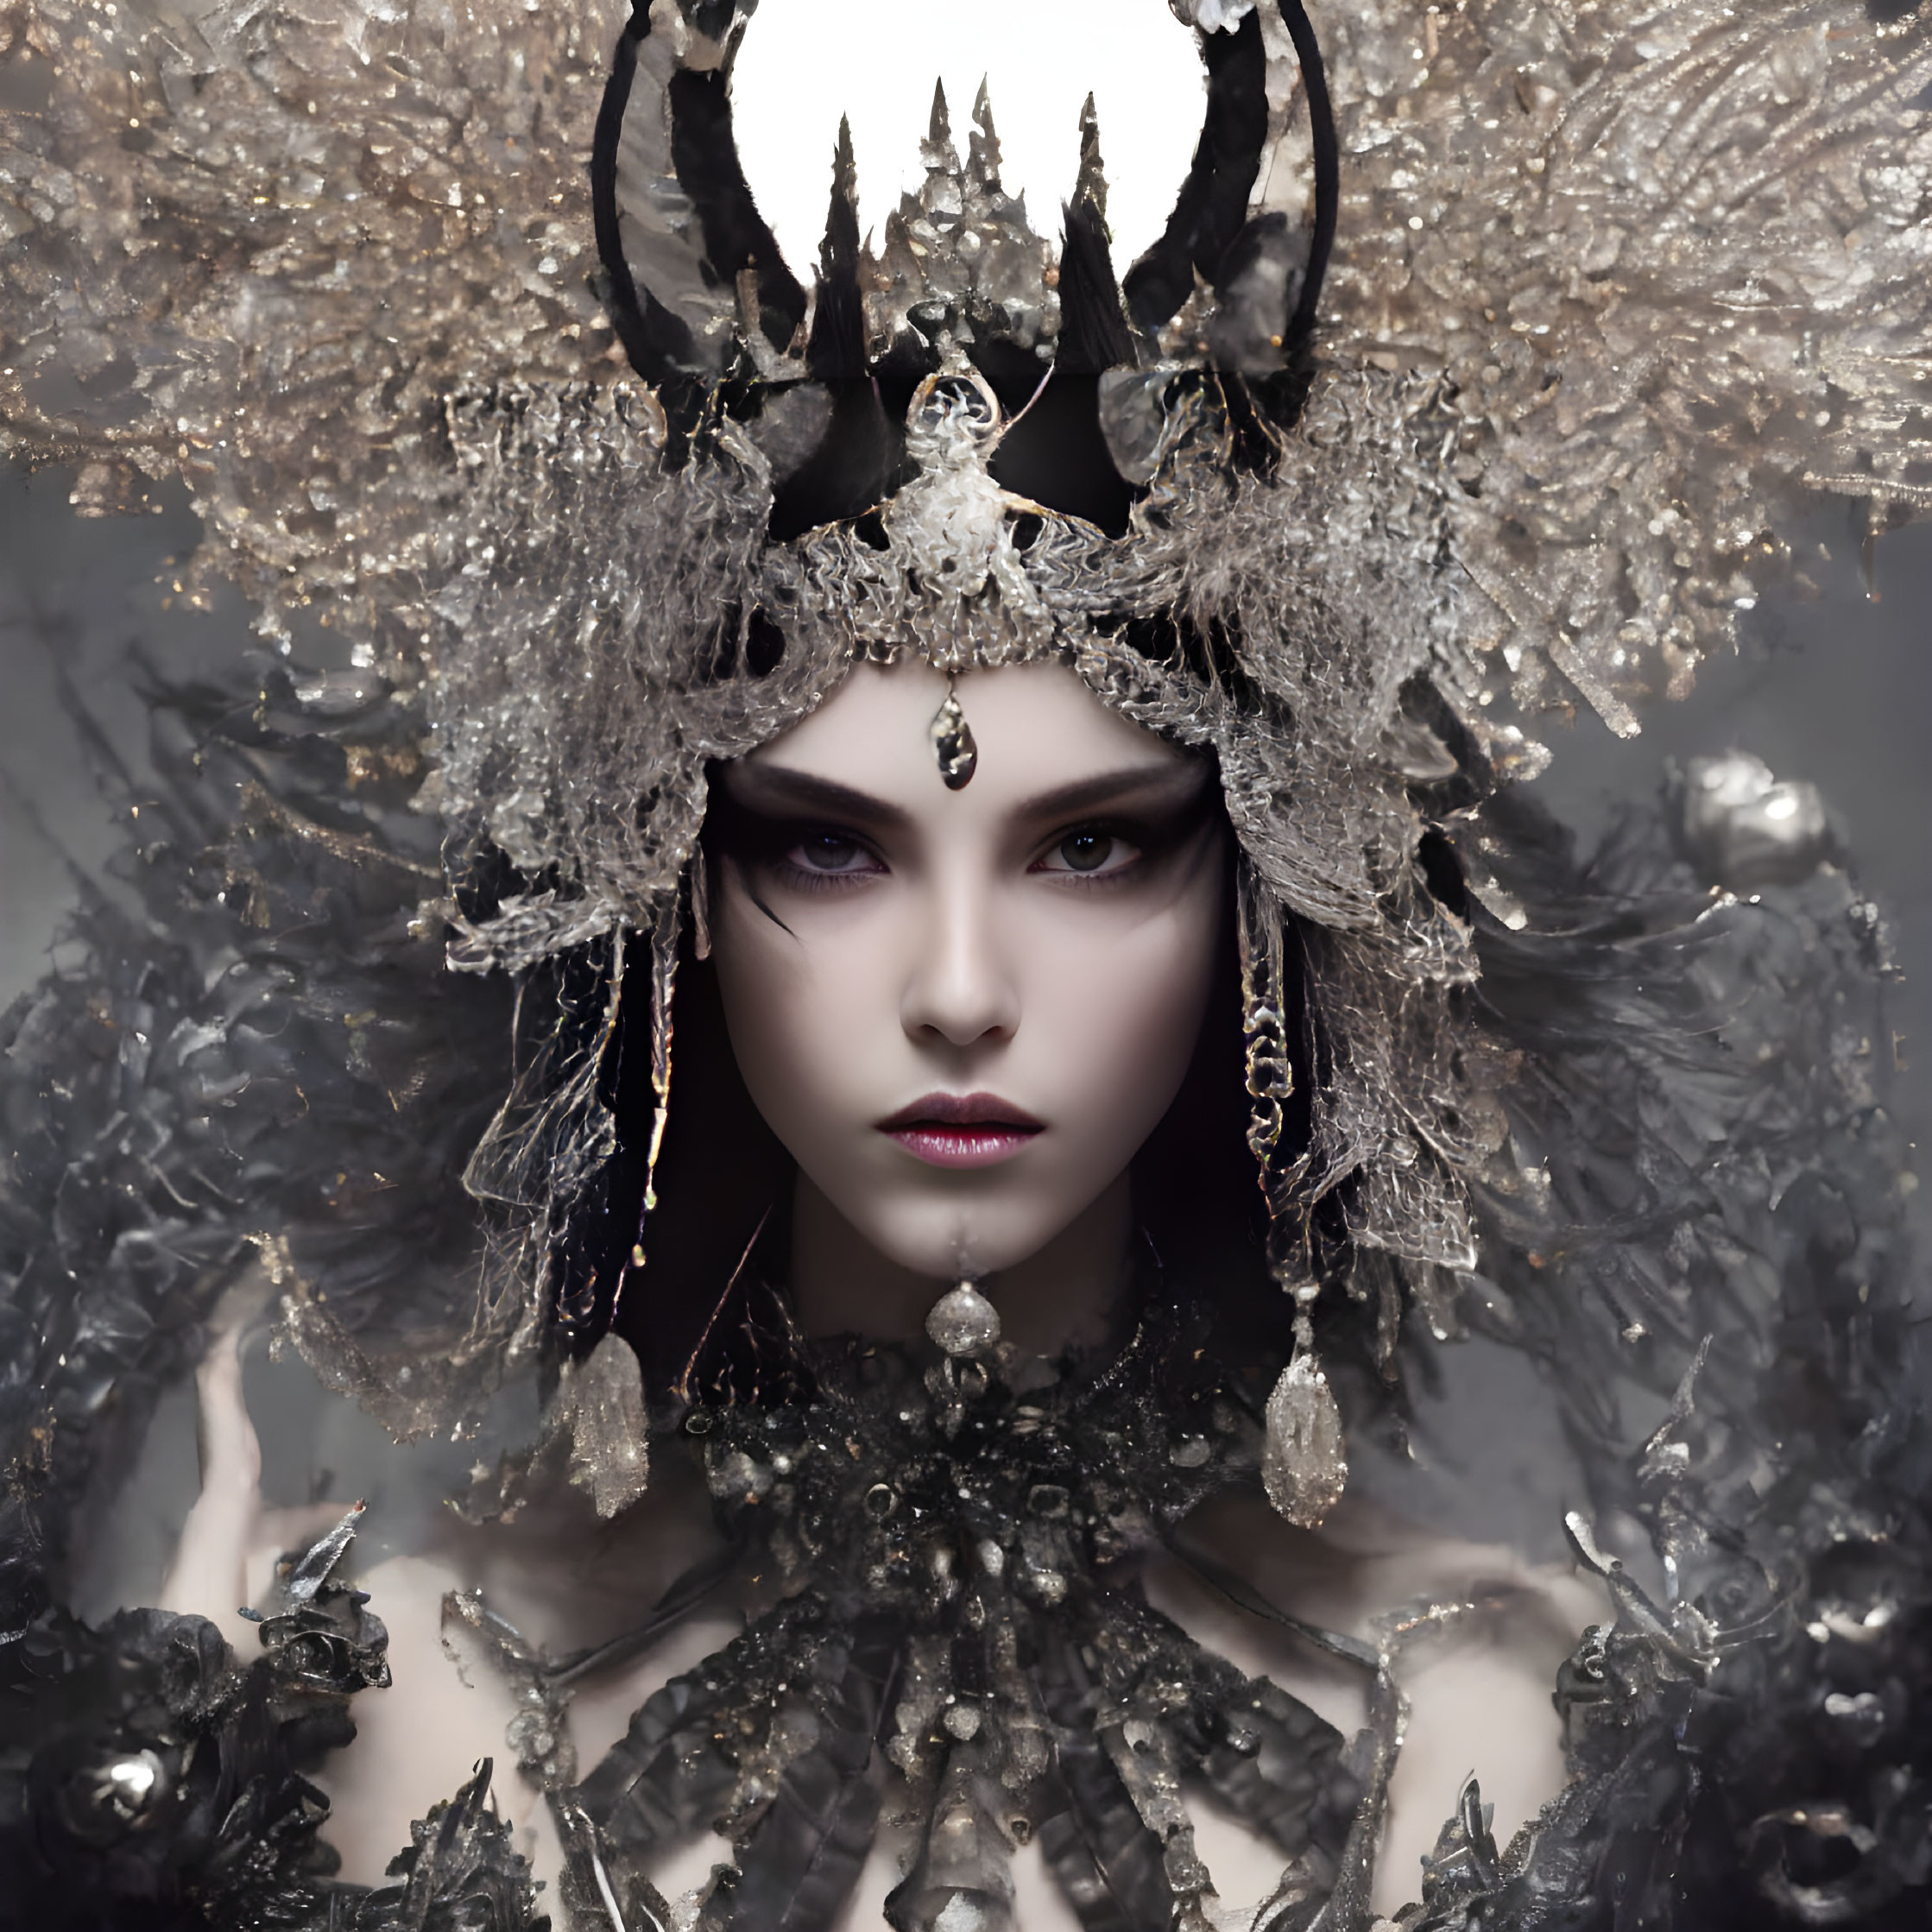 Person with Striking Makeup and Elaborate Metallic Headdress